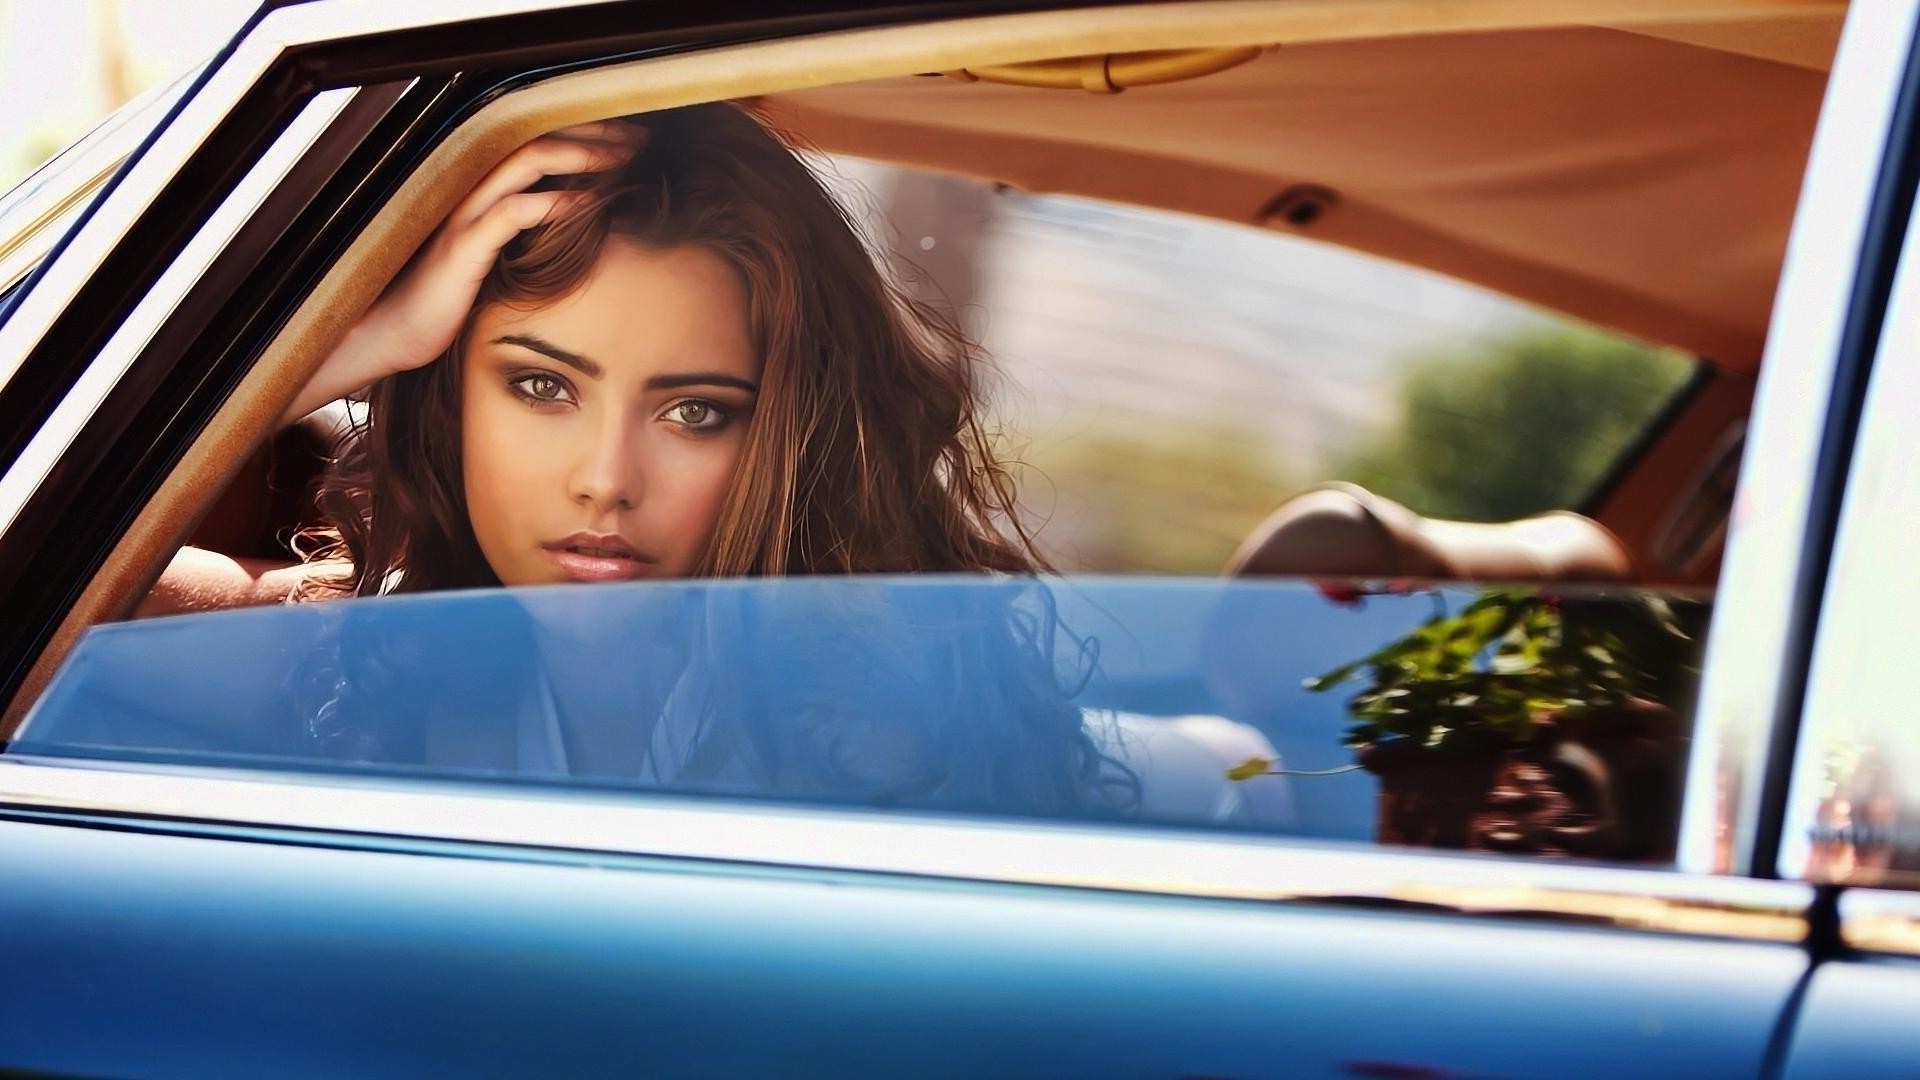 the other girls car woman vehicle travel outdoors adult girl transportation system driver one portrait summer convertible window vacation blur happiness beautiful leisure